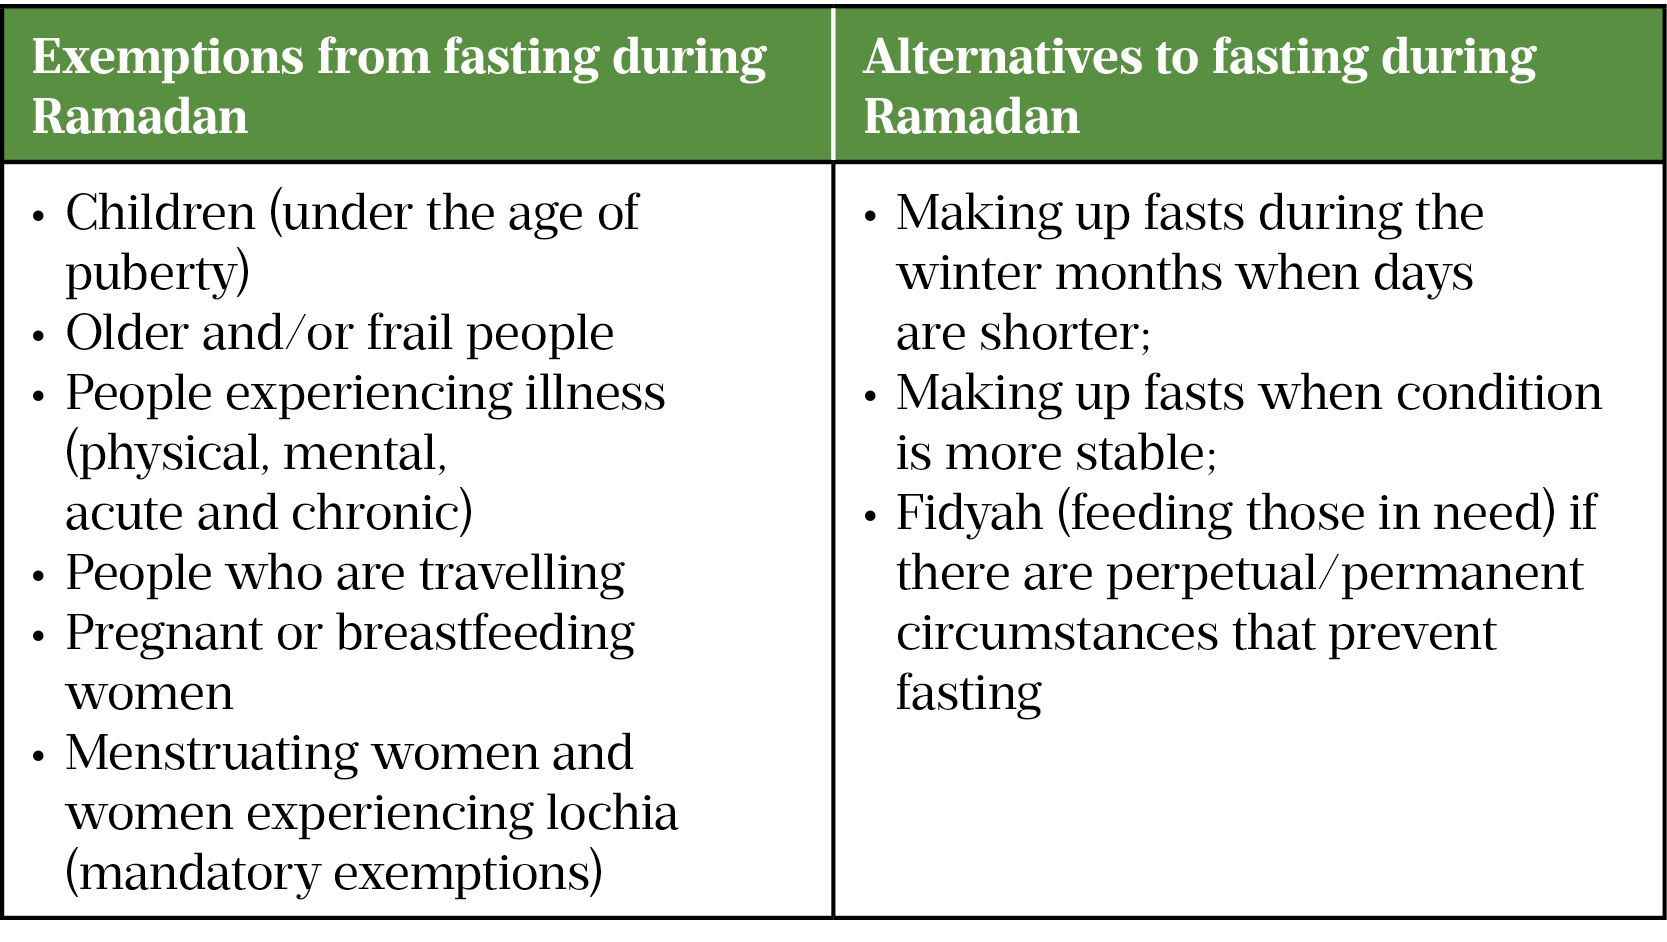 Table: Exemptions and alternatives to fasting during Ramadan